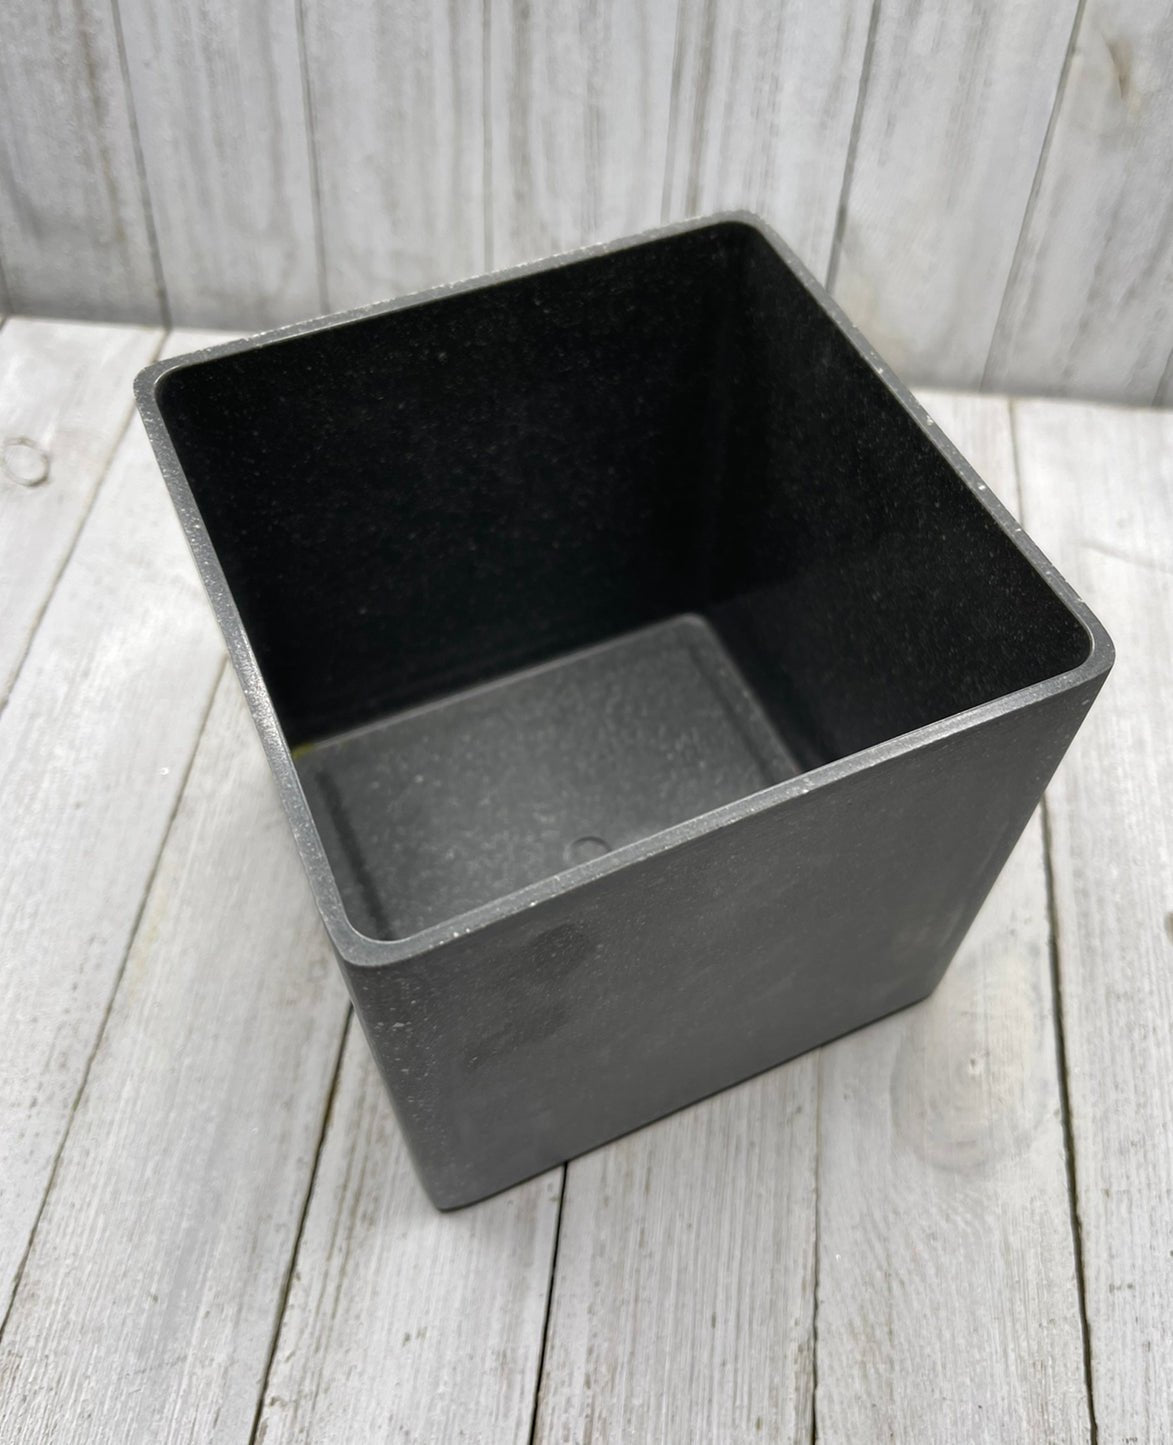 Plastic, square, faux concrete, container for floral designs - Greenery MarketVases147847